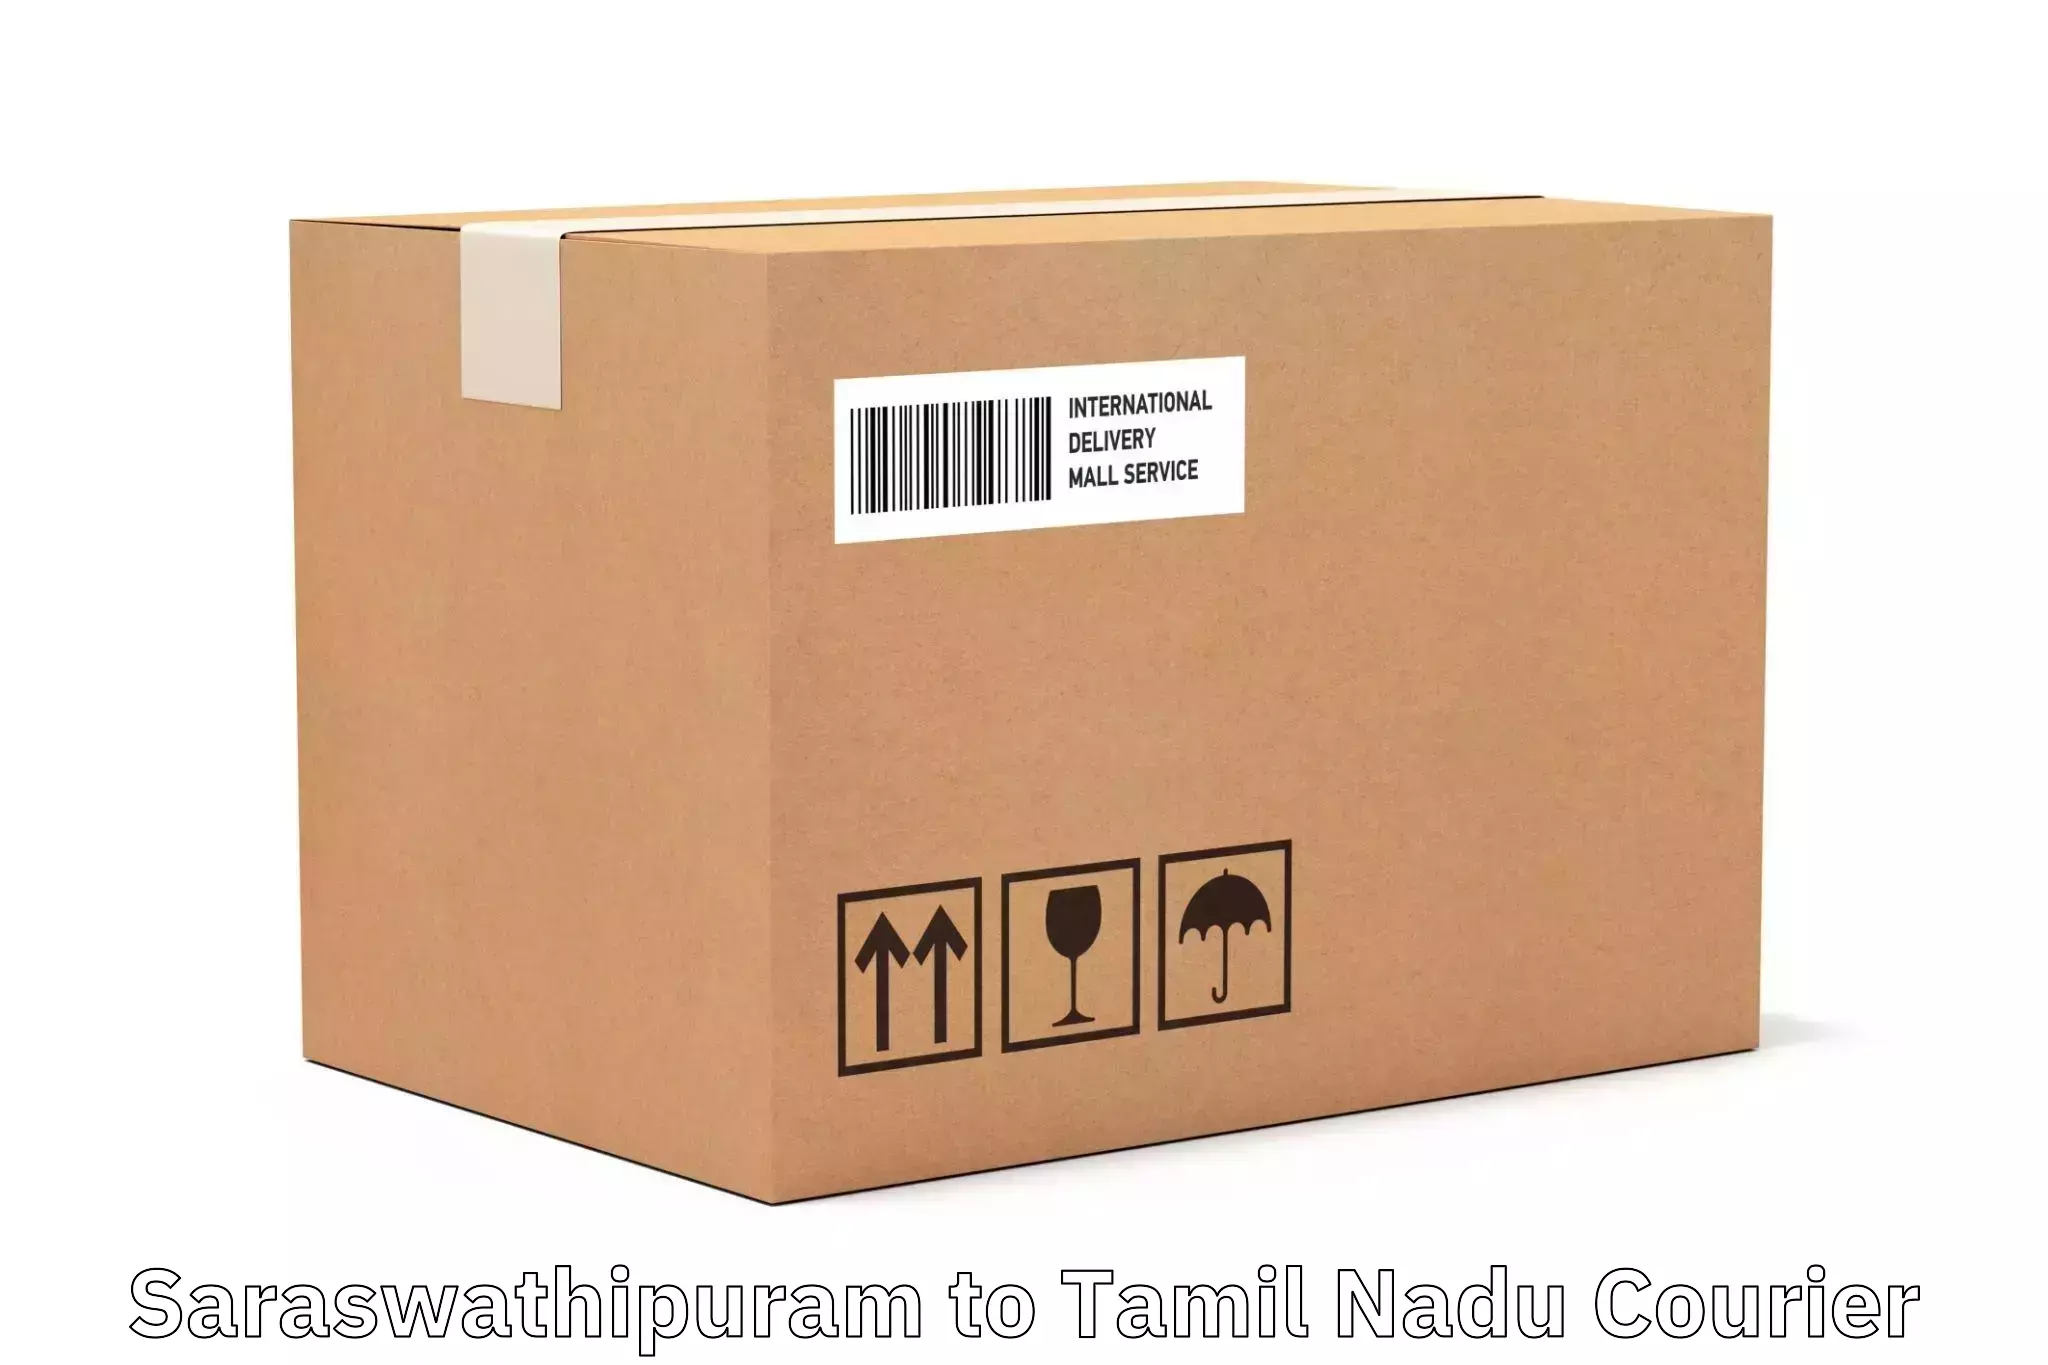 Lightweight parcel options Saraswathipuram to Saveetha Institute of Medical and Technical Sciences Chennai